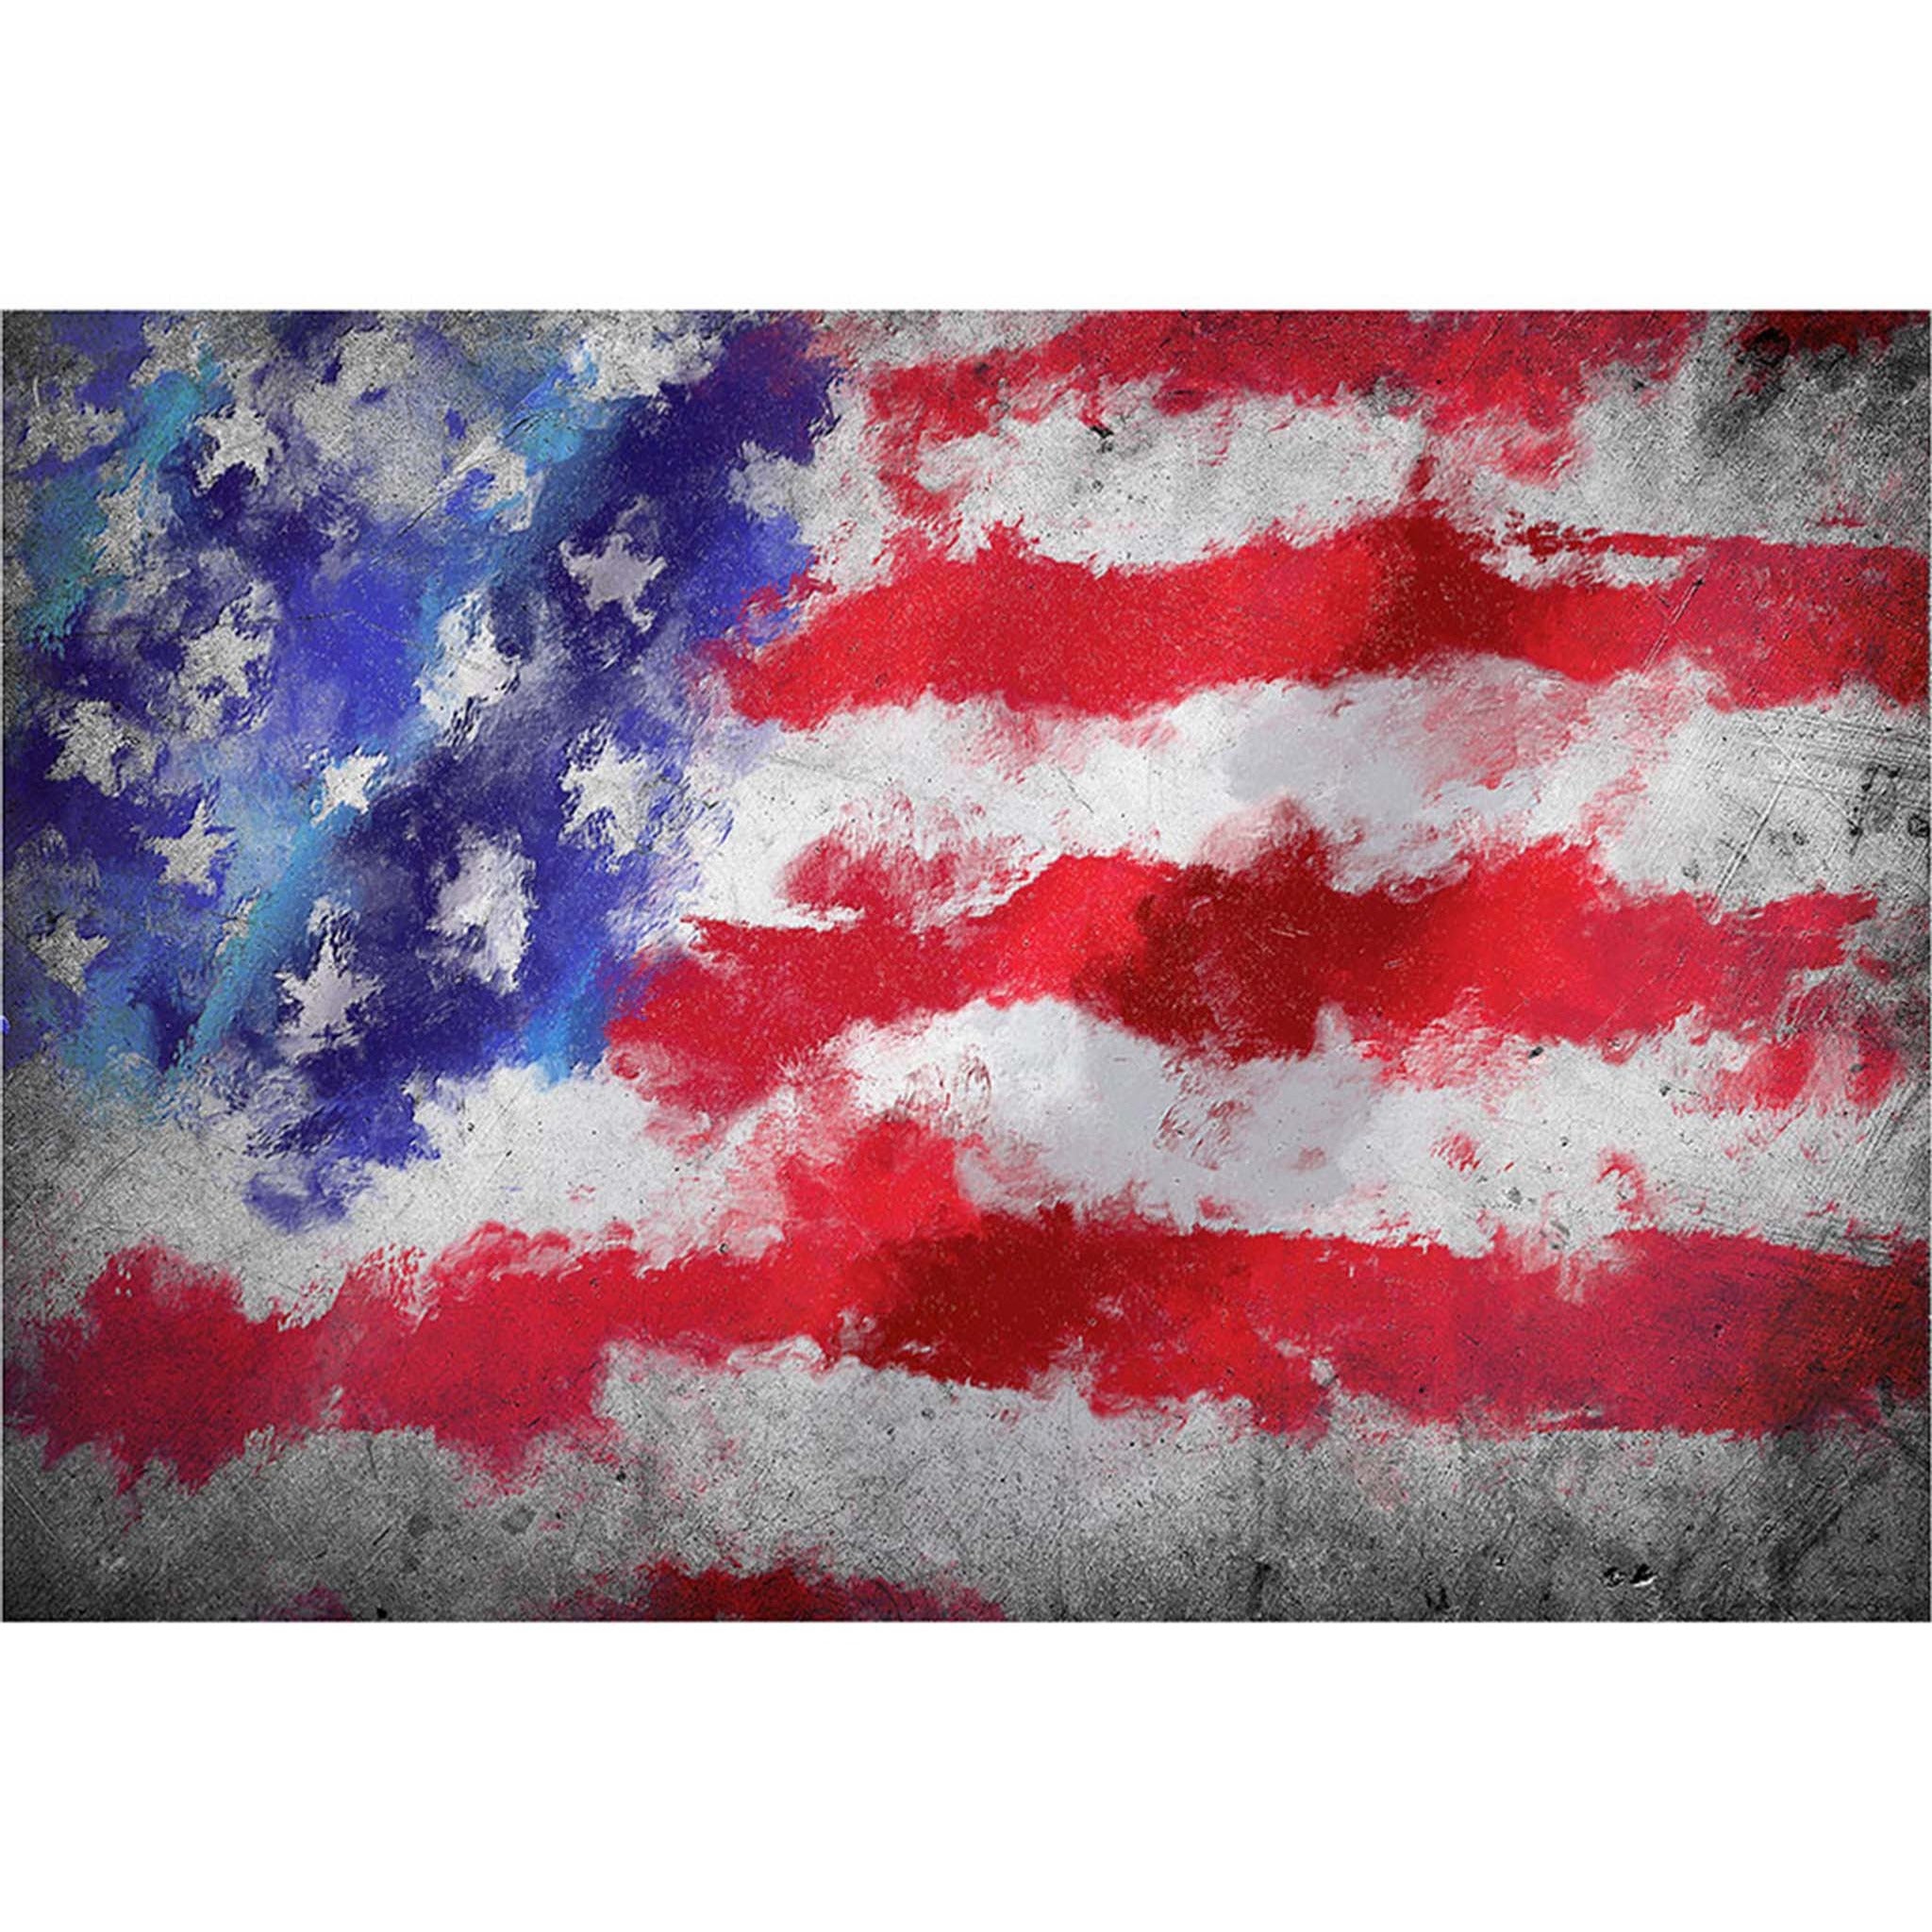 Rice paper design of a watercolor style American flag. White borders are on the top and bottom.